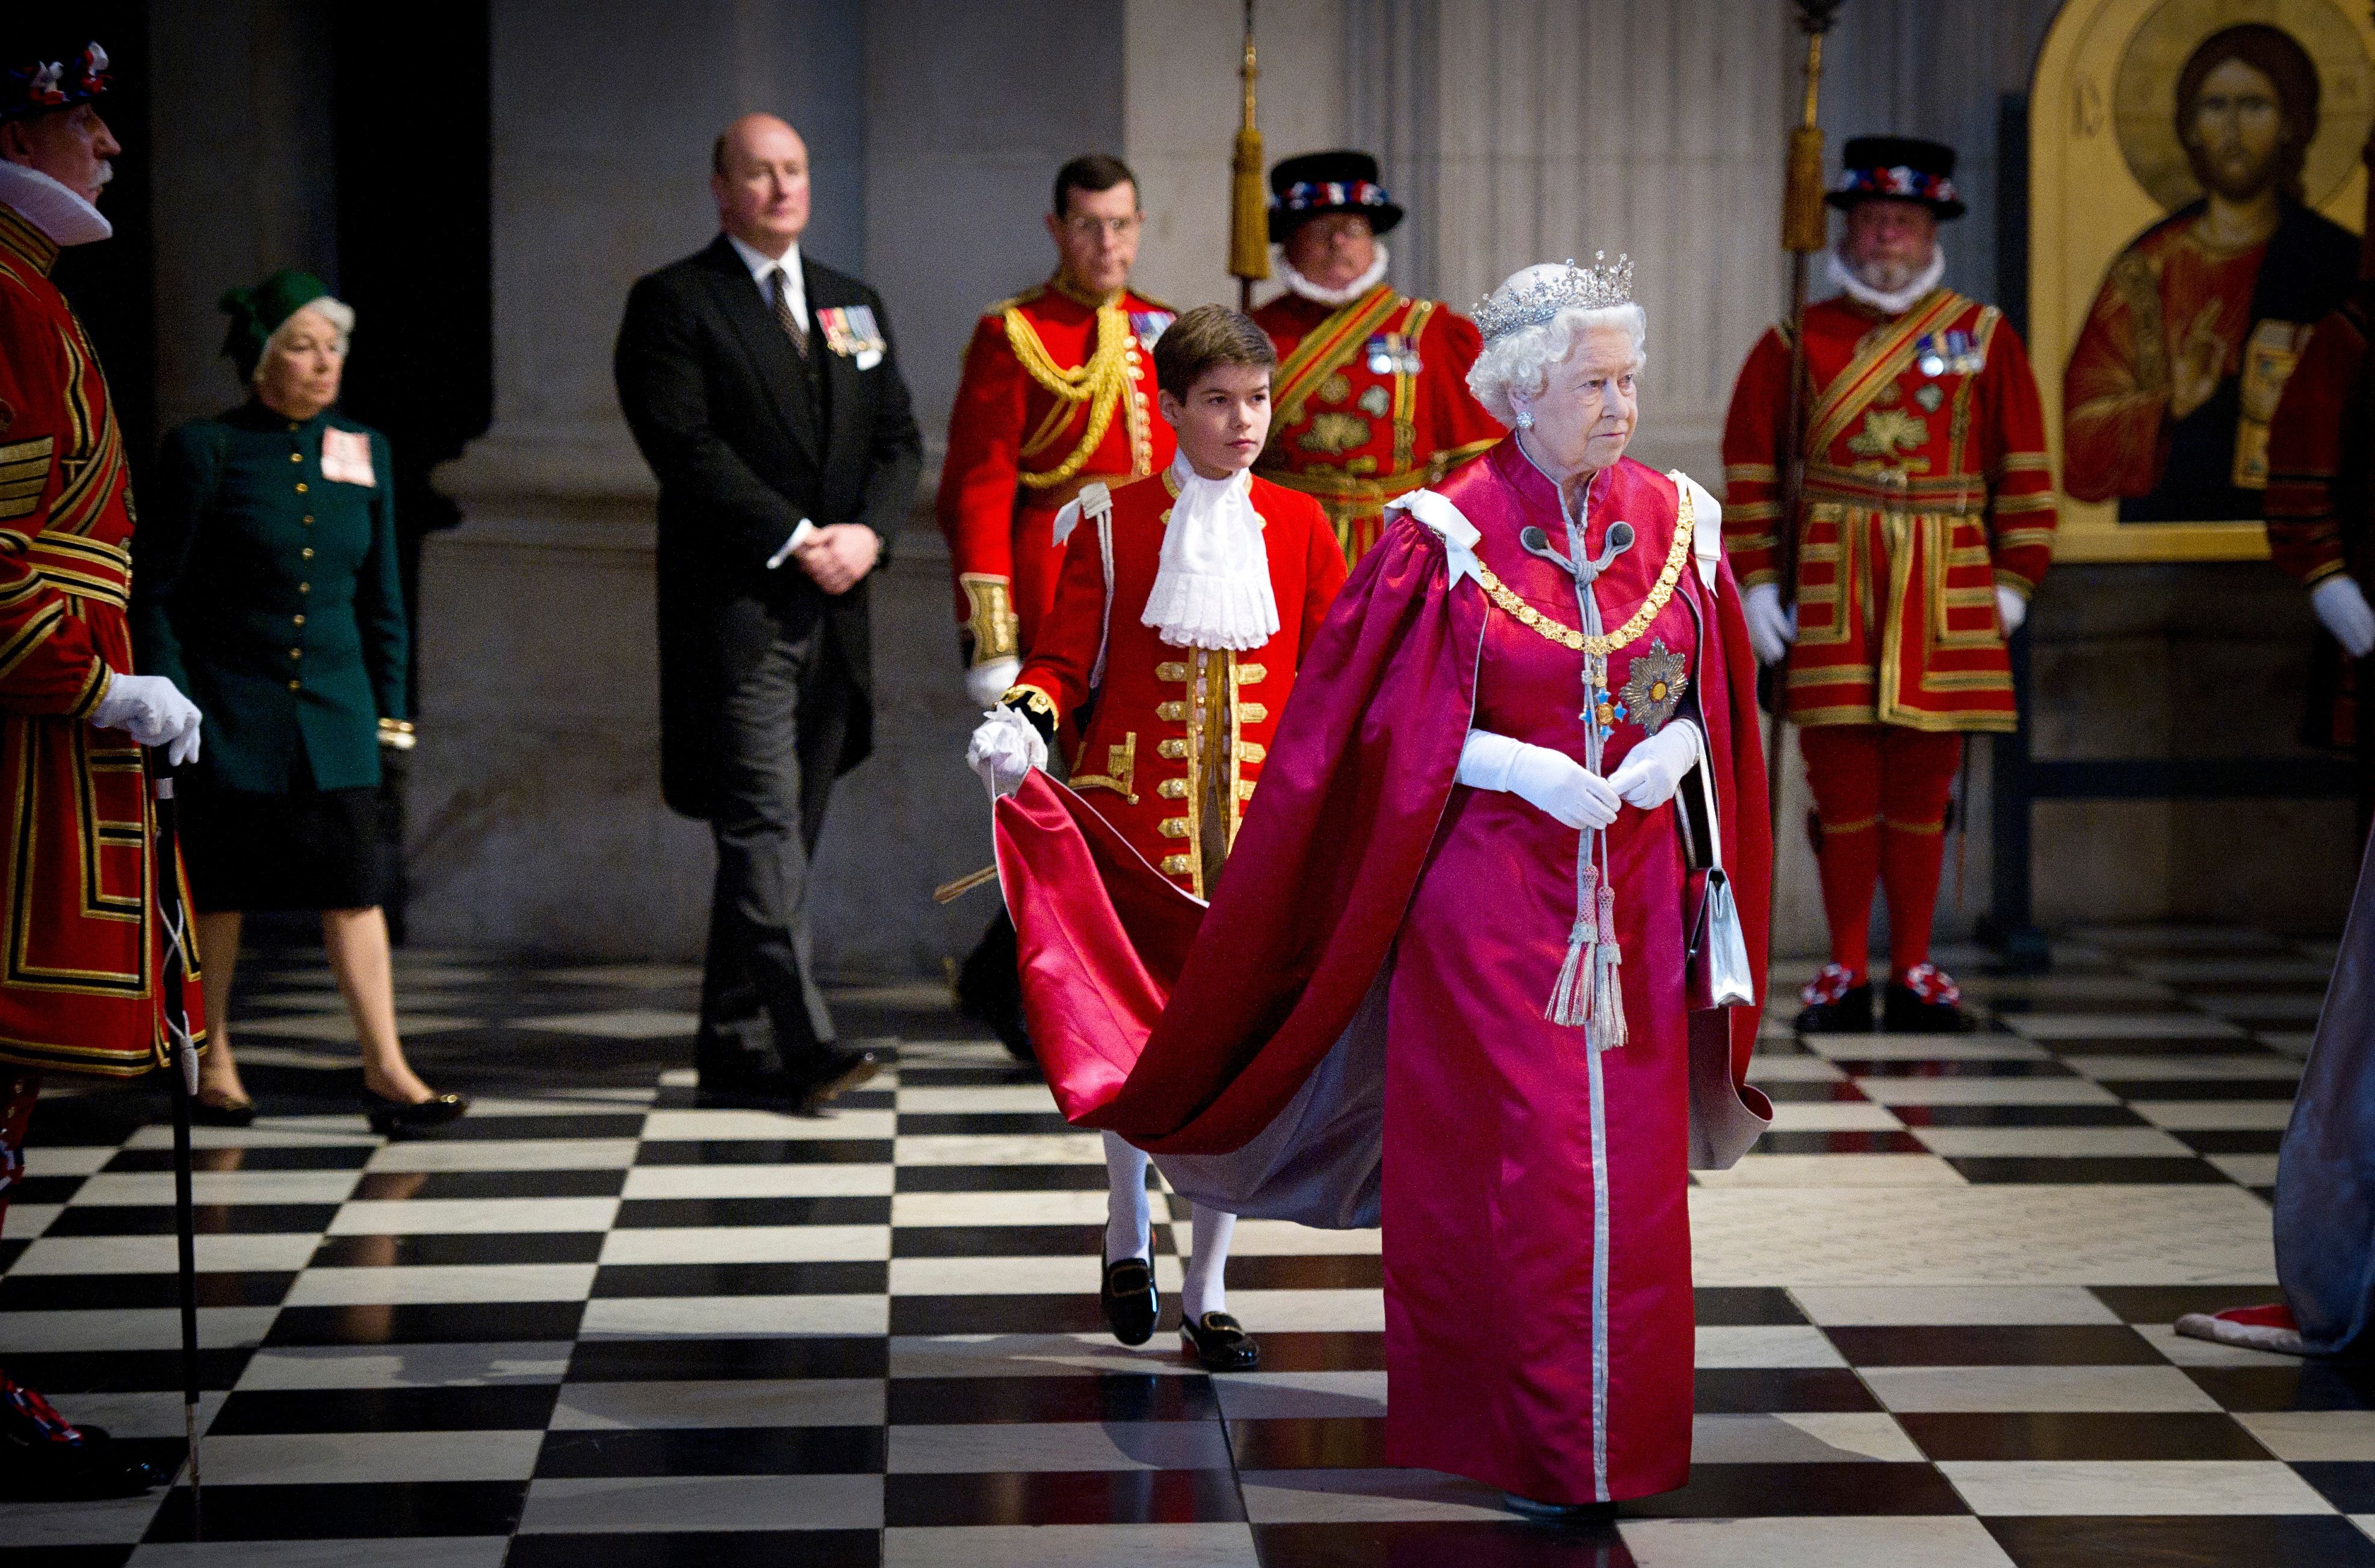 Queen Elizabeth II at a service for the Order of the British Empire at St Paul's Cathedral in 2012 in London, England | Source: Getty Images